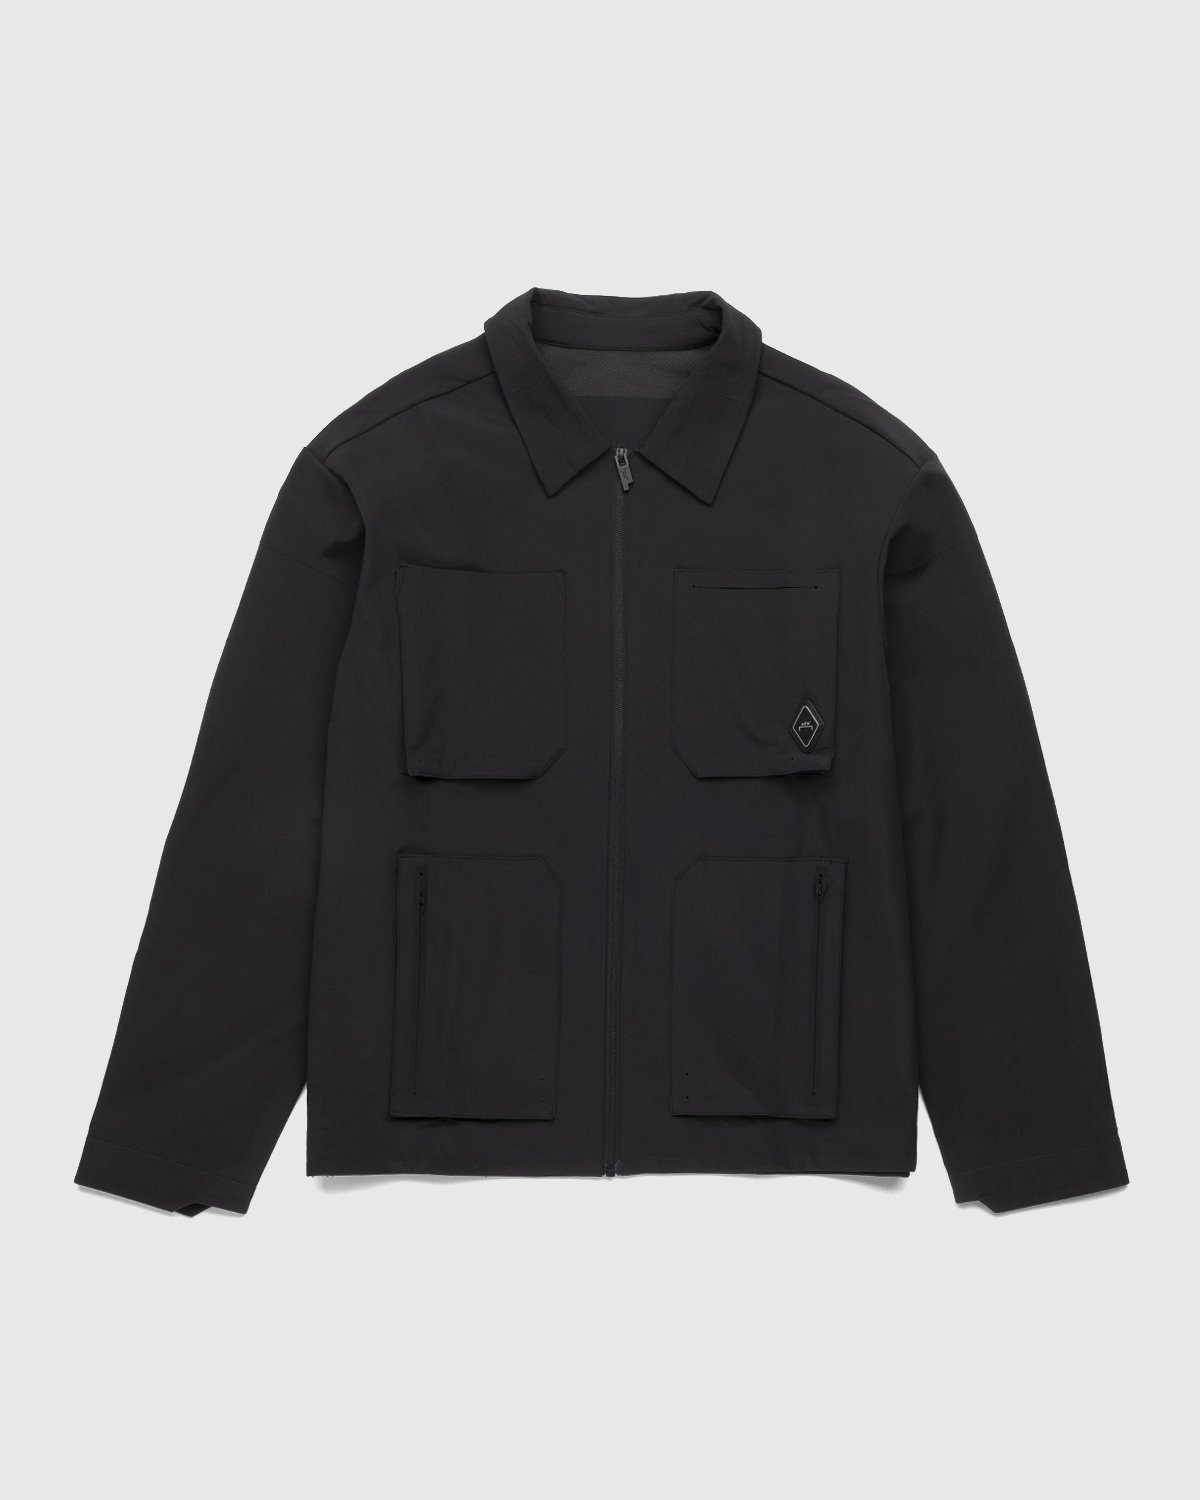 A-Cold-Wall* - Technical Overshirt Black - Clothing - Black - Image 1